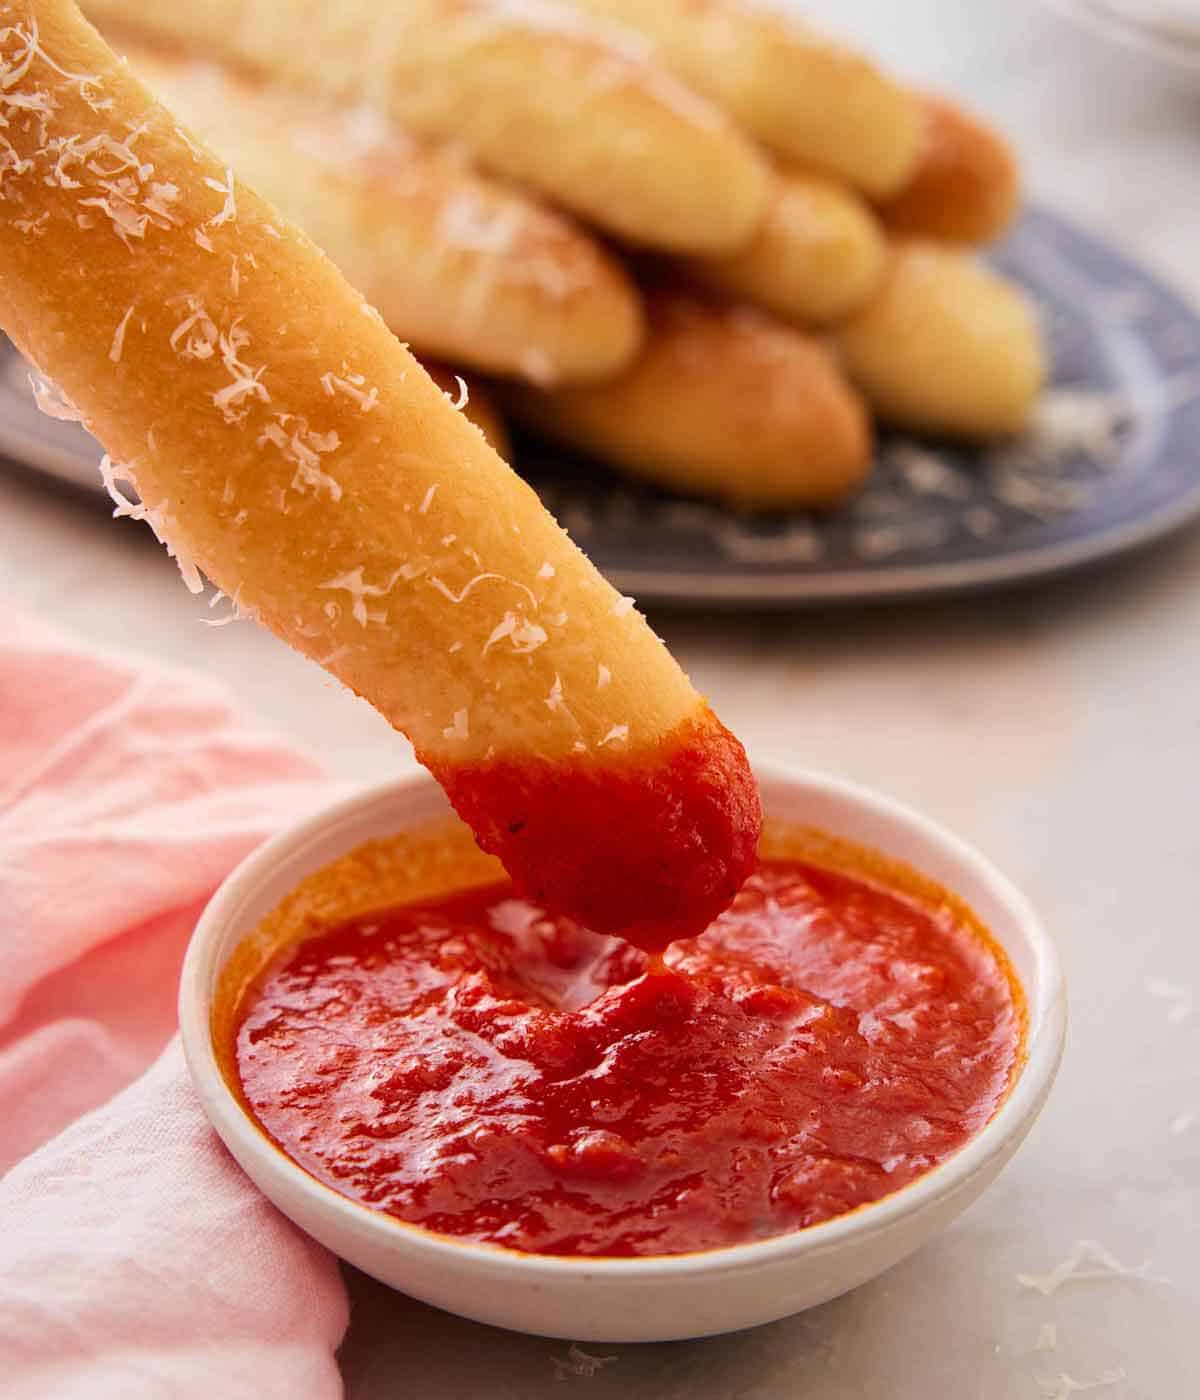 A breadstick dipped in a small bowl of red sauce with grated parmesan on the bread. More breadsticks in the background.